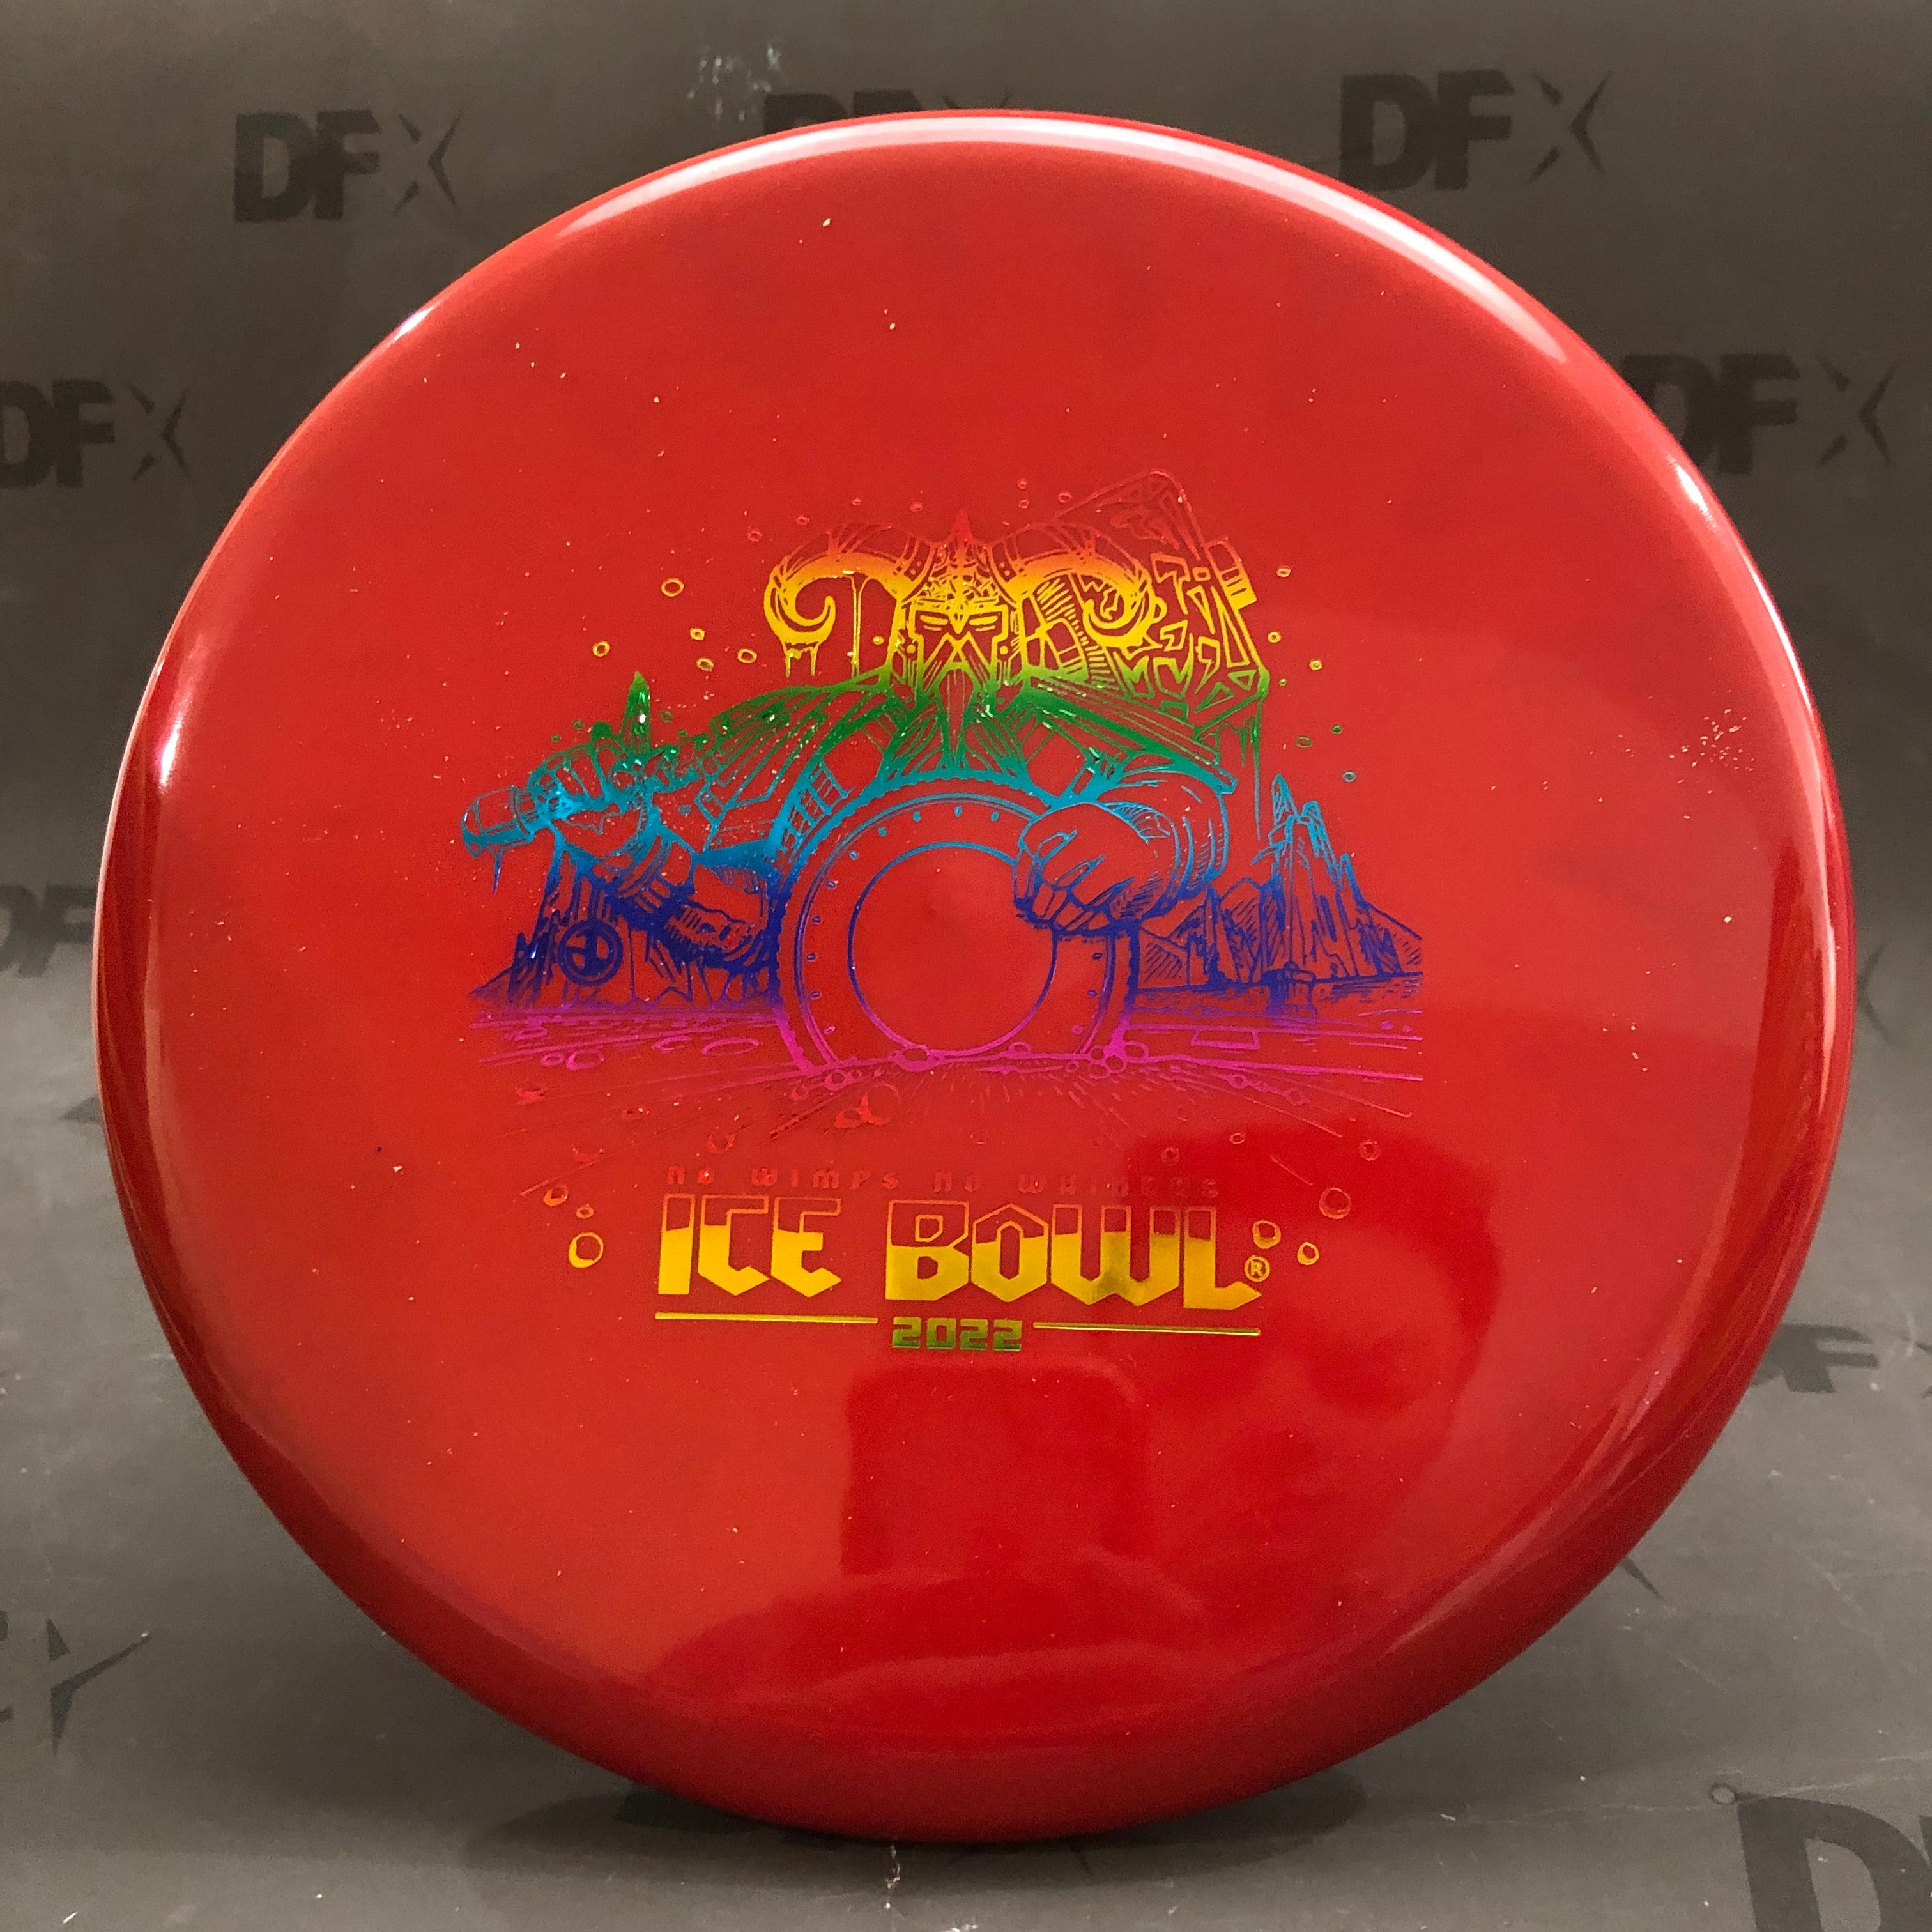 Thought Space Athletics Ethereal Praxis - Ice Bowl